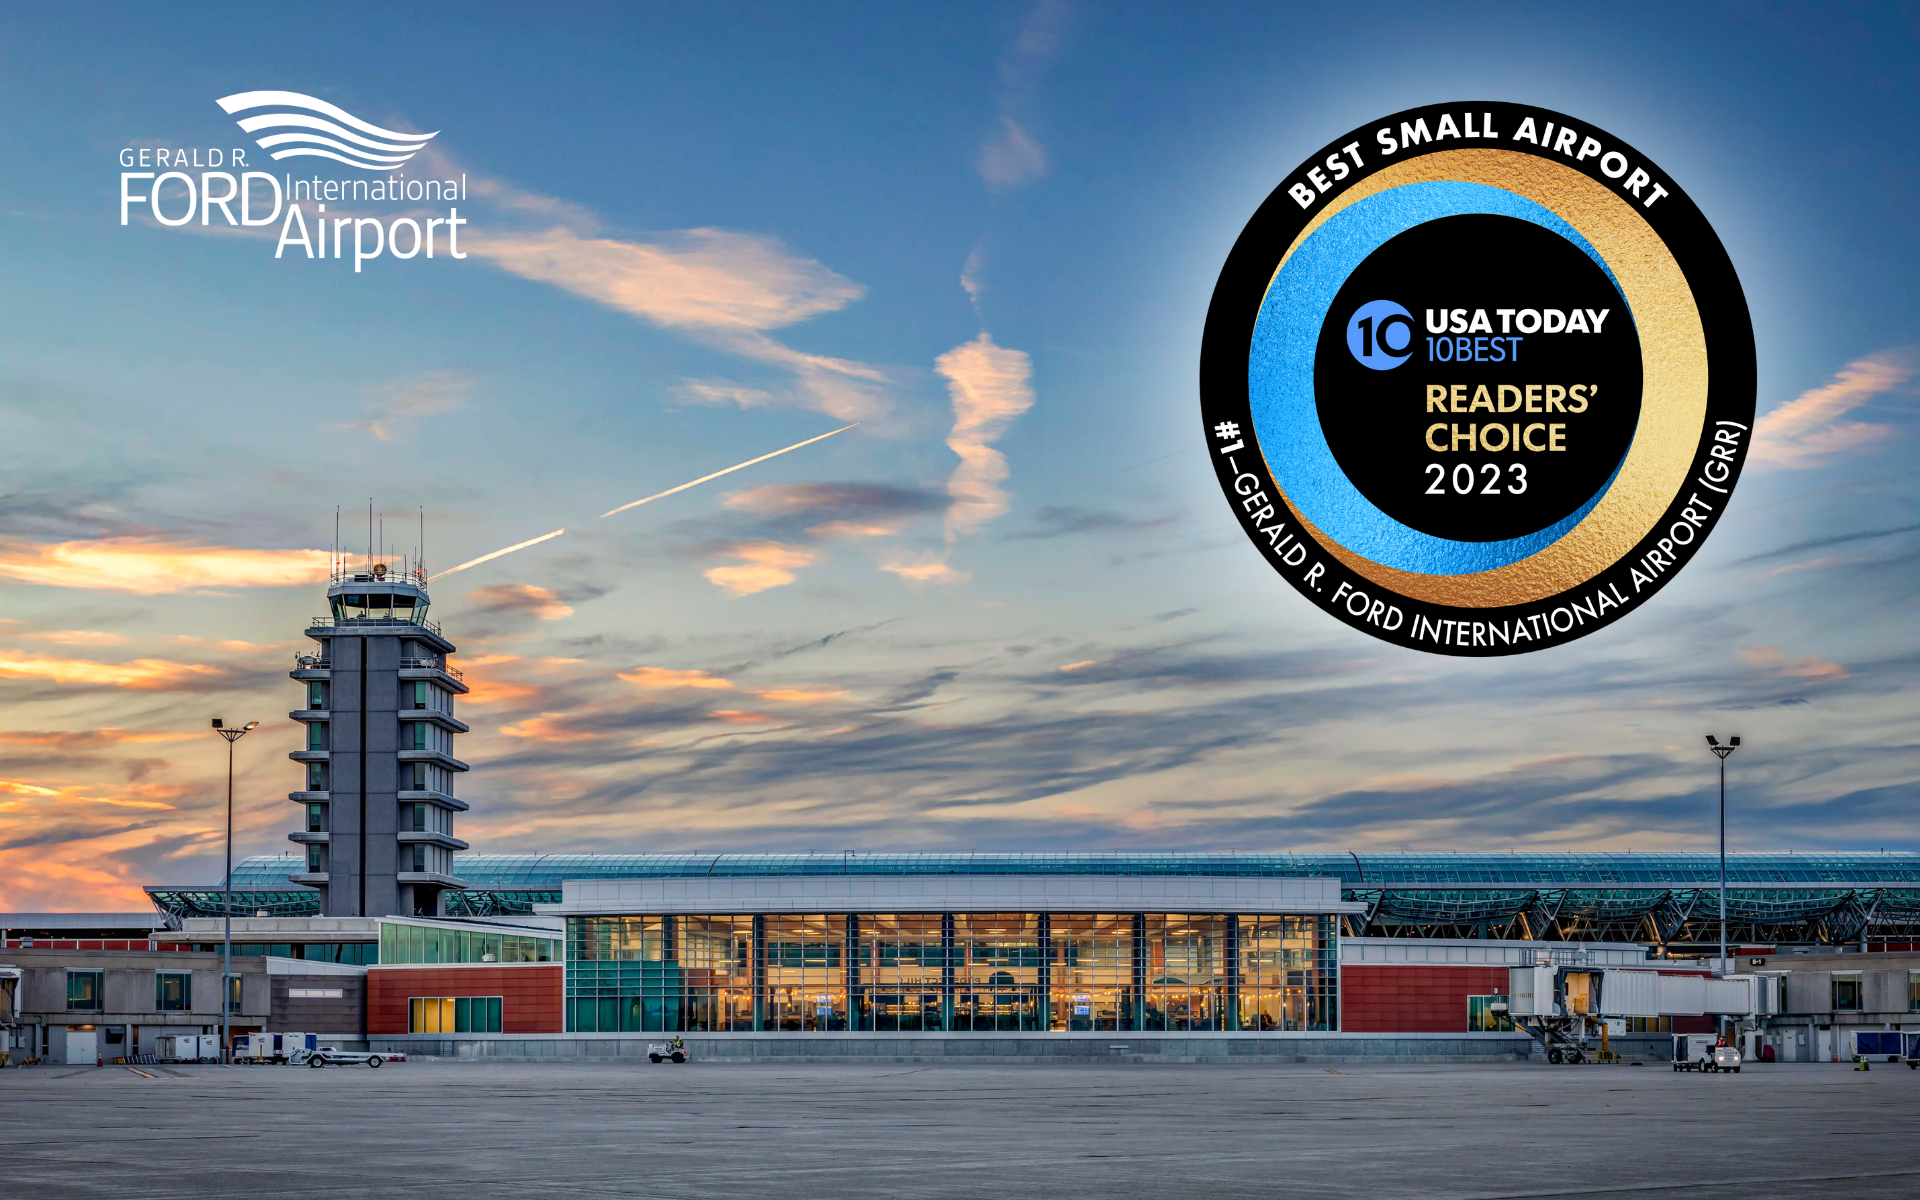 Ford International Airport Voted the Best Small Airport in the Country by USA TODAY